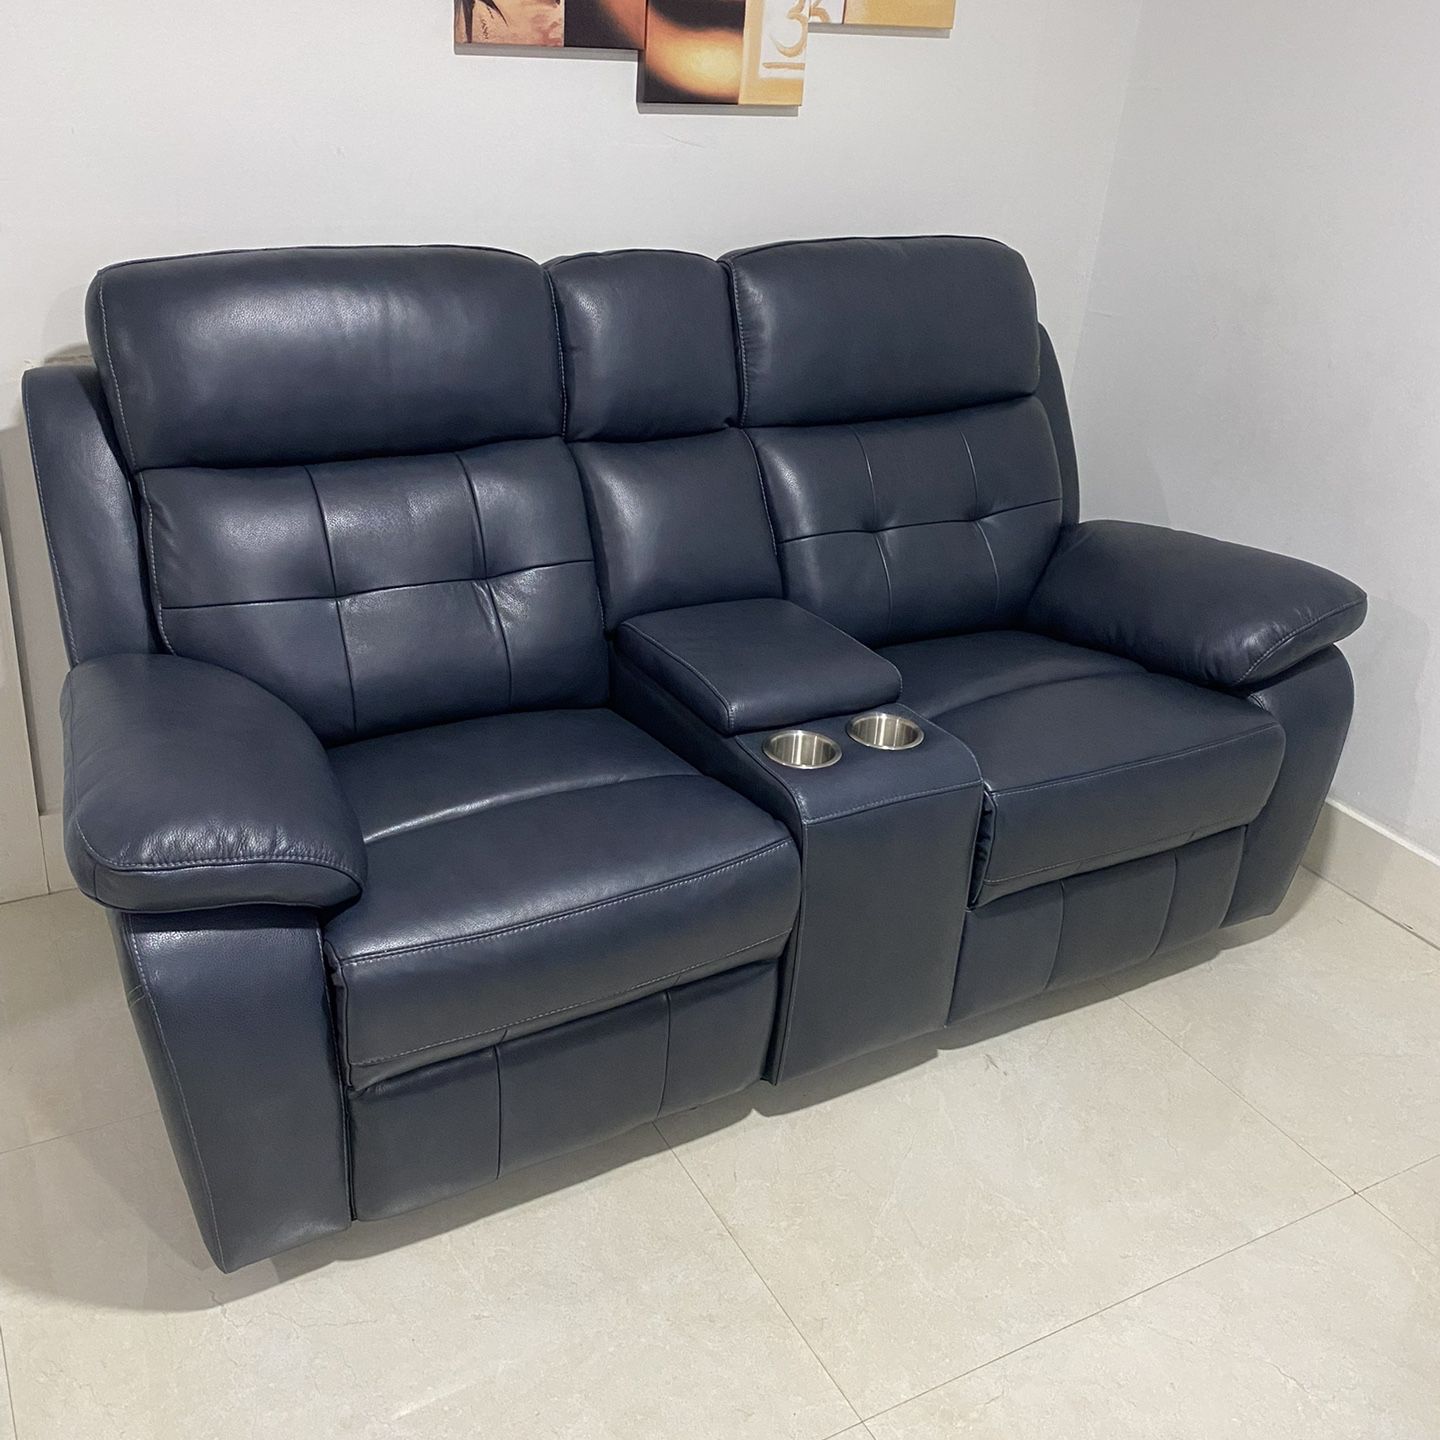 Brand New Reclainer Love Seat With 2 Recliners Rocking Chairs 